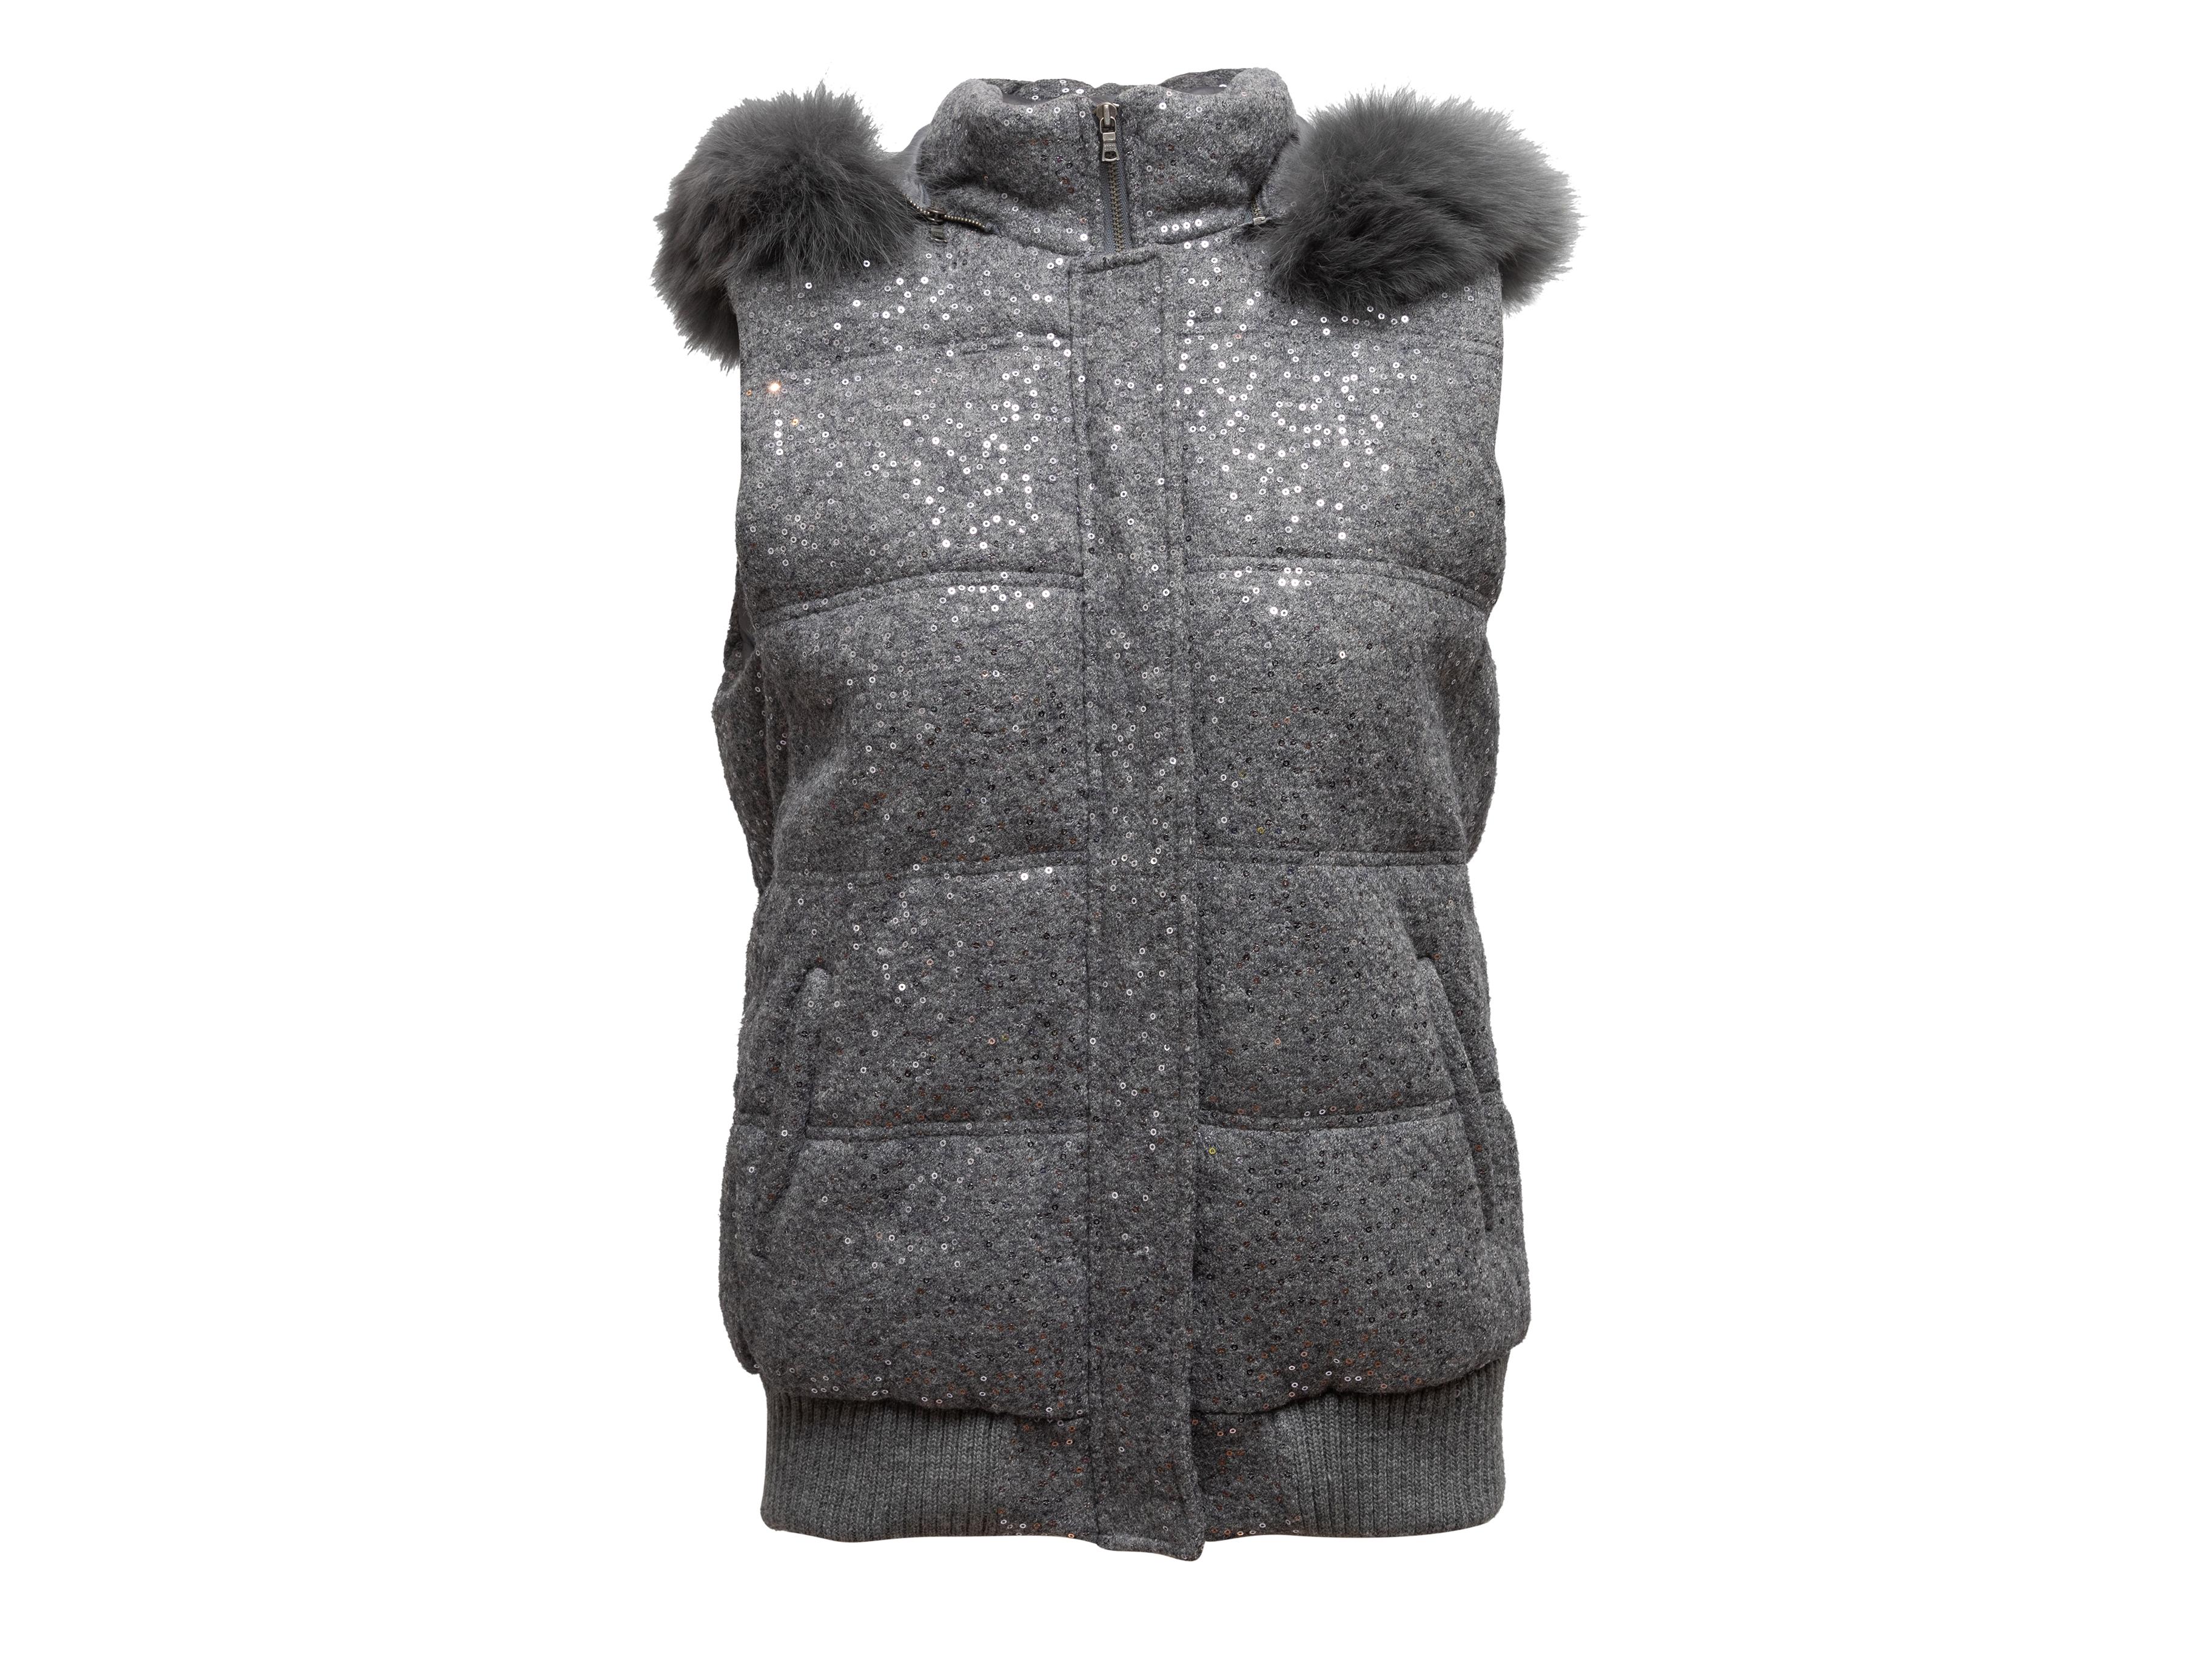 Grey sequined puffer vest by Alice + Olivia. Fox fur-trimmed hood. Dual hip pockets. Zip closure at center front. 42